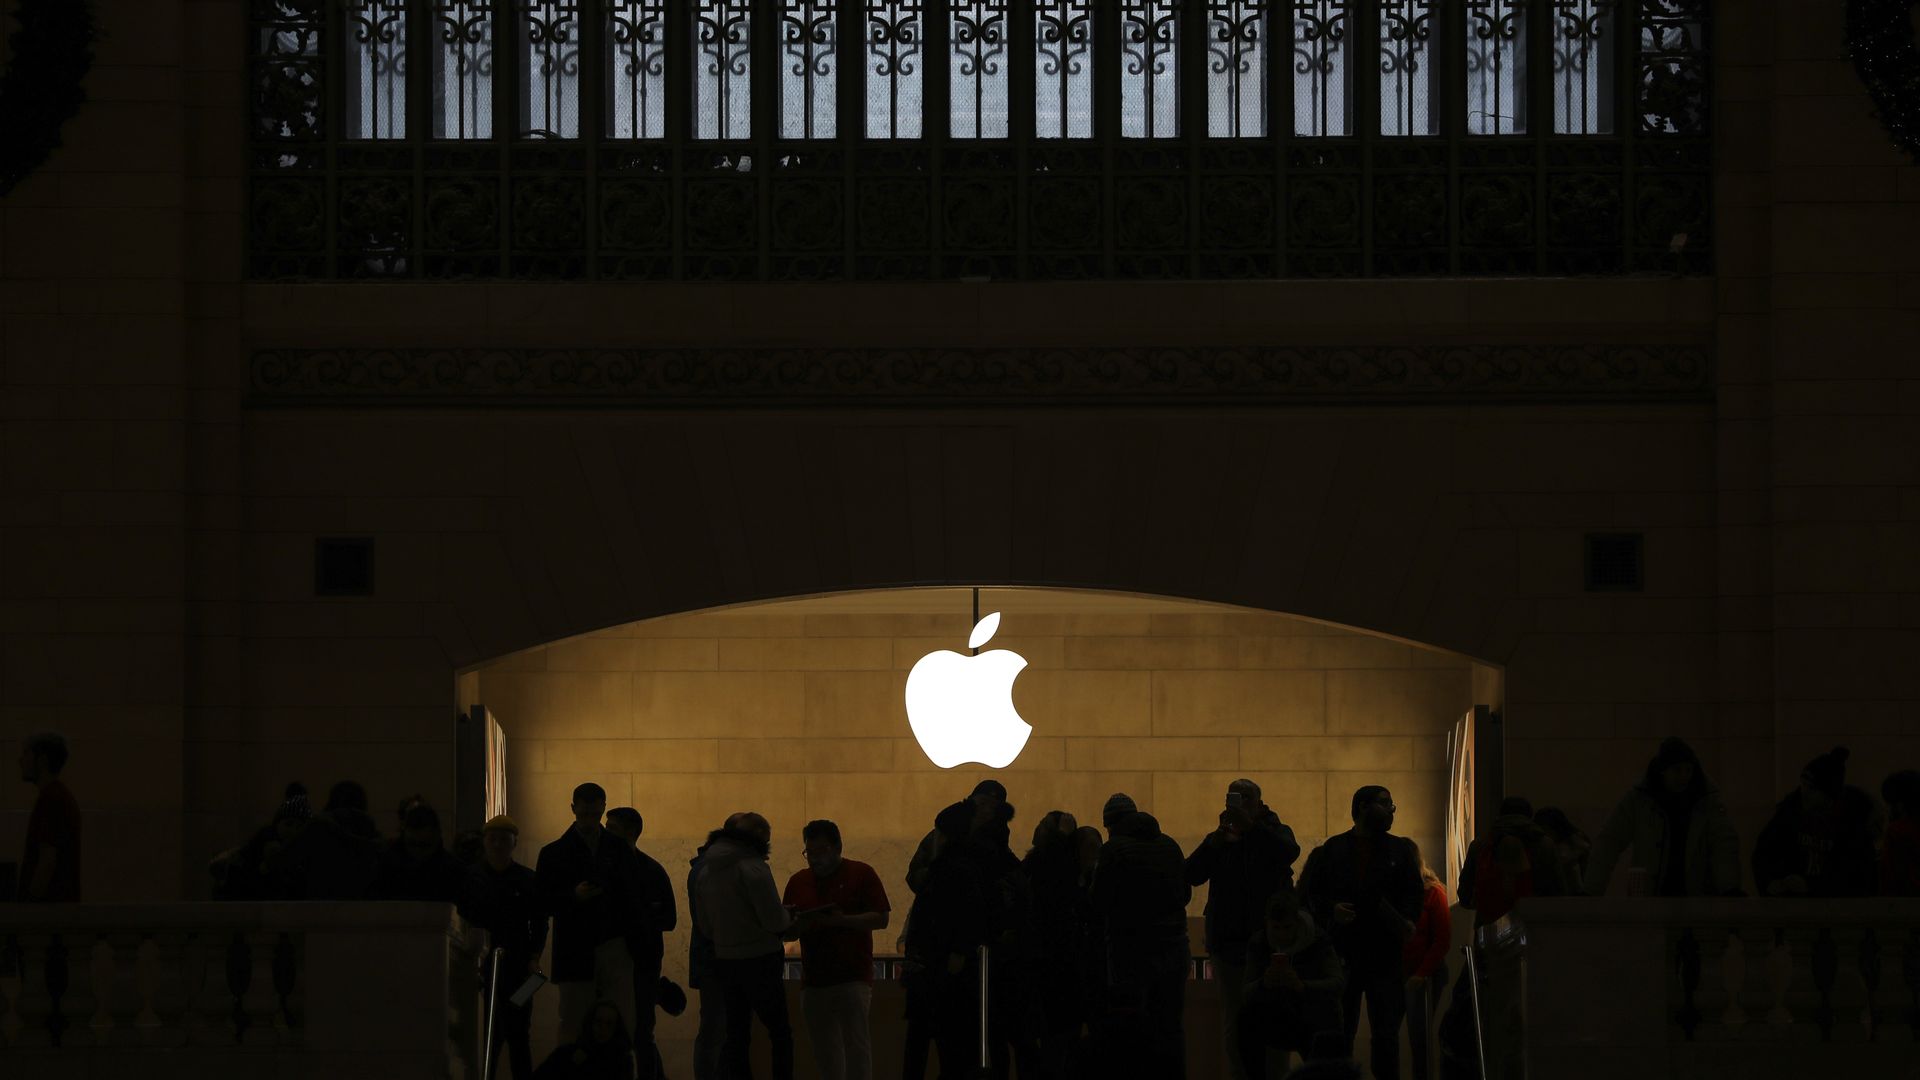 People shop in an Apple retail store in Grand Central Terminal, January 3, 2019 in New York City.